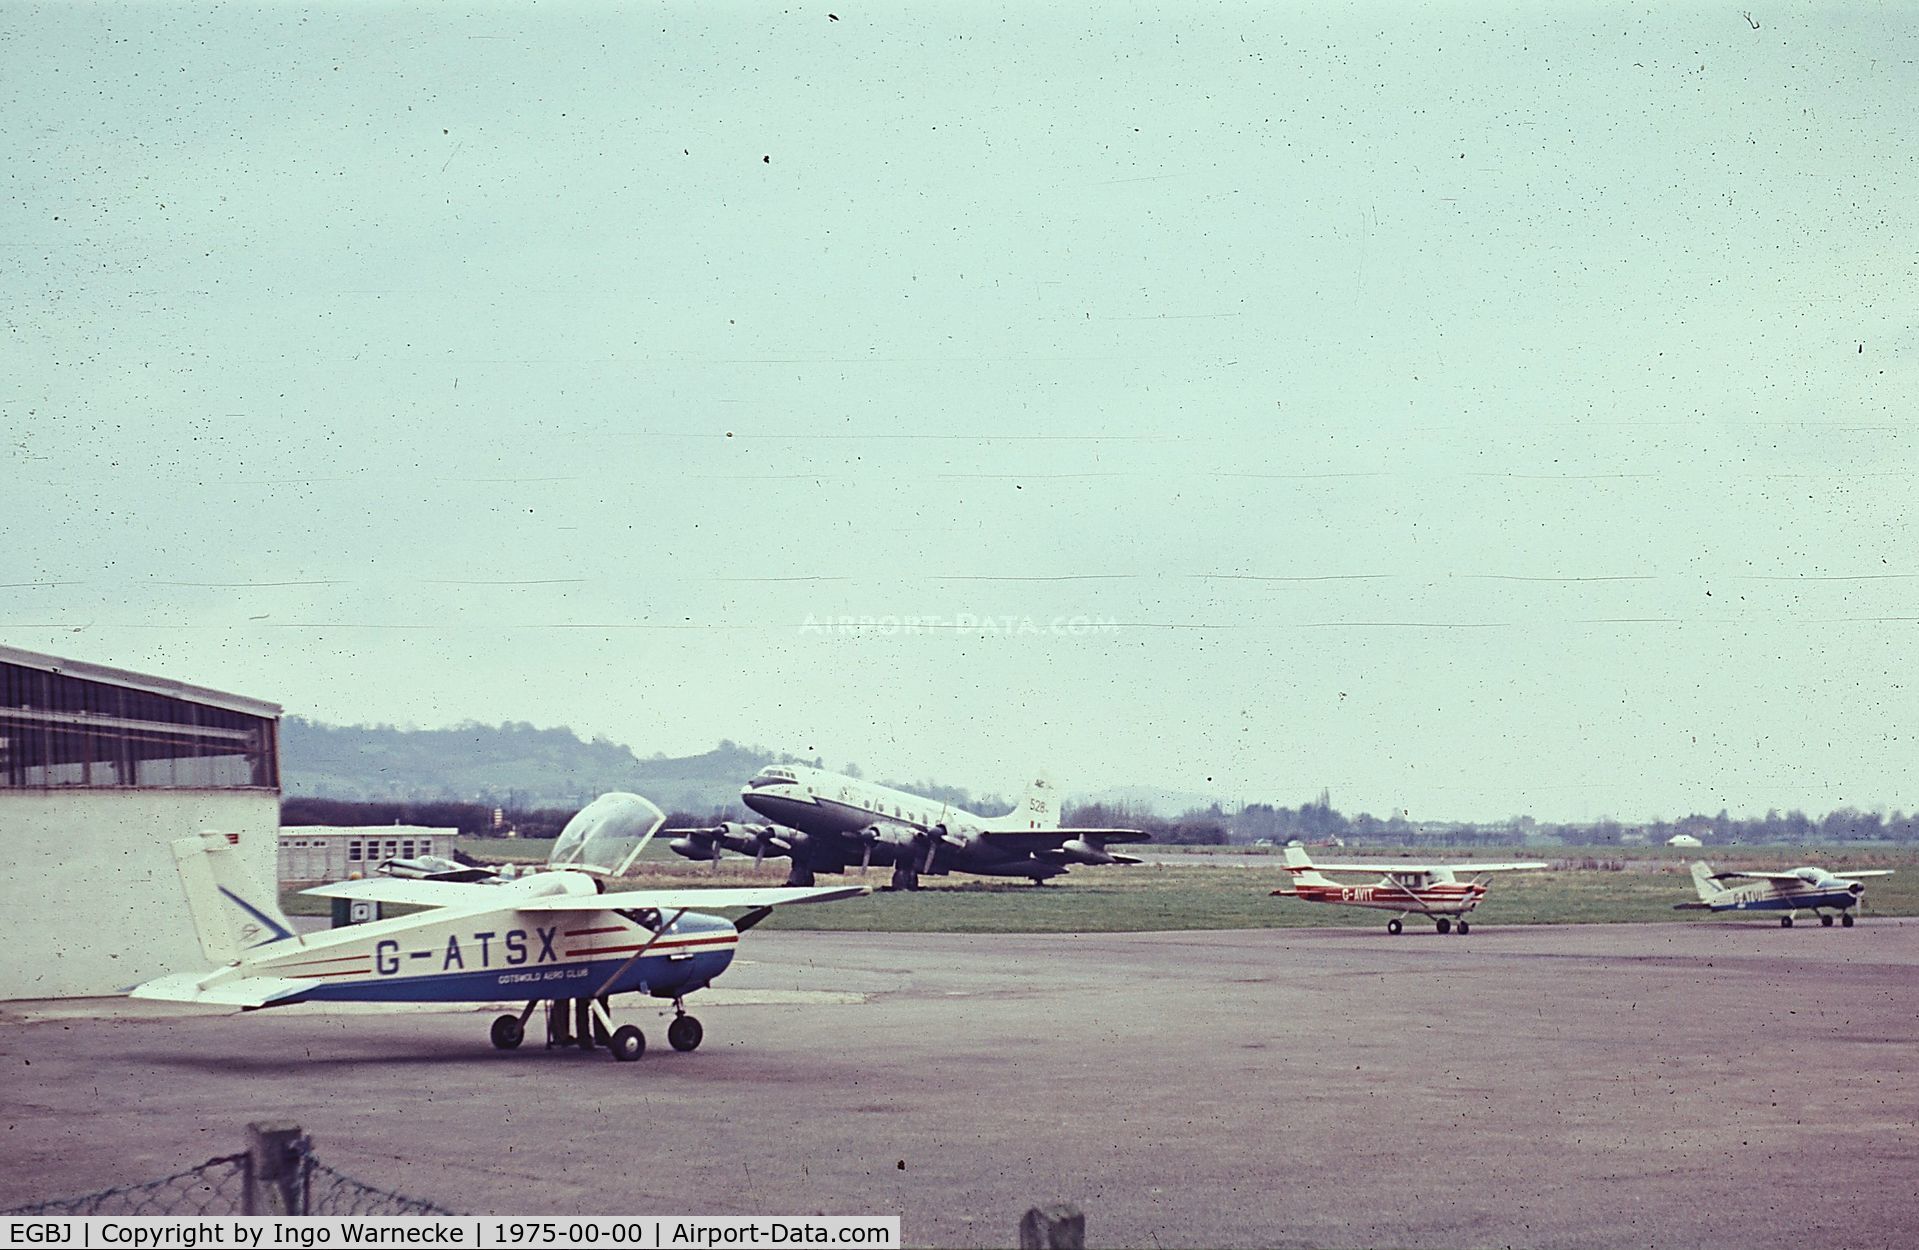 Gloucestershire Airport, Staverton, England United Kingdom (EGBJ) - aircraft on the apron at Staverton airfield